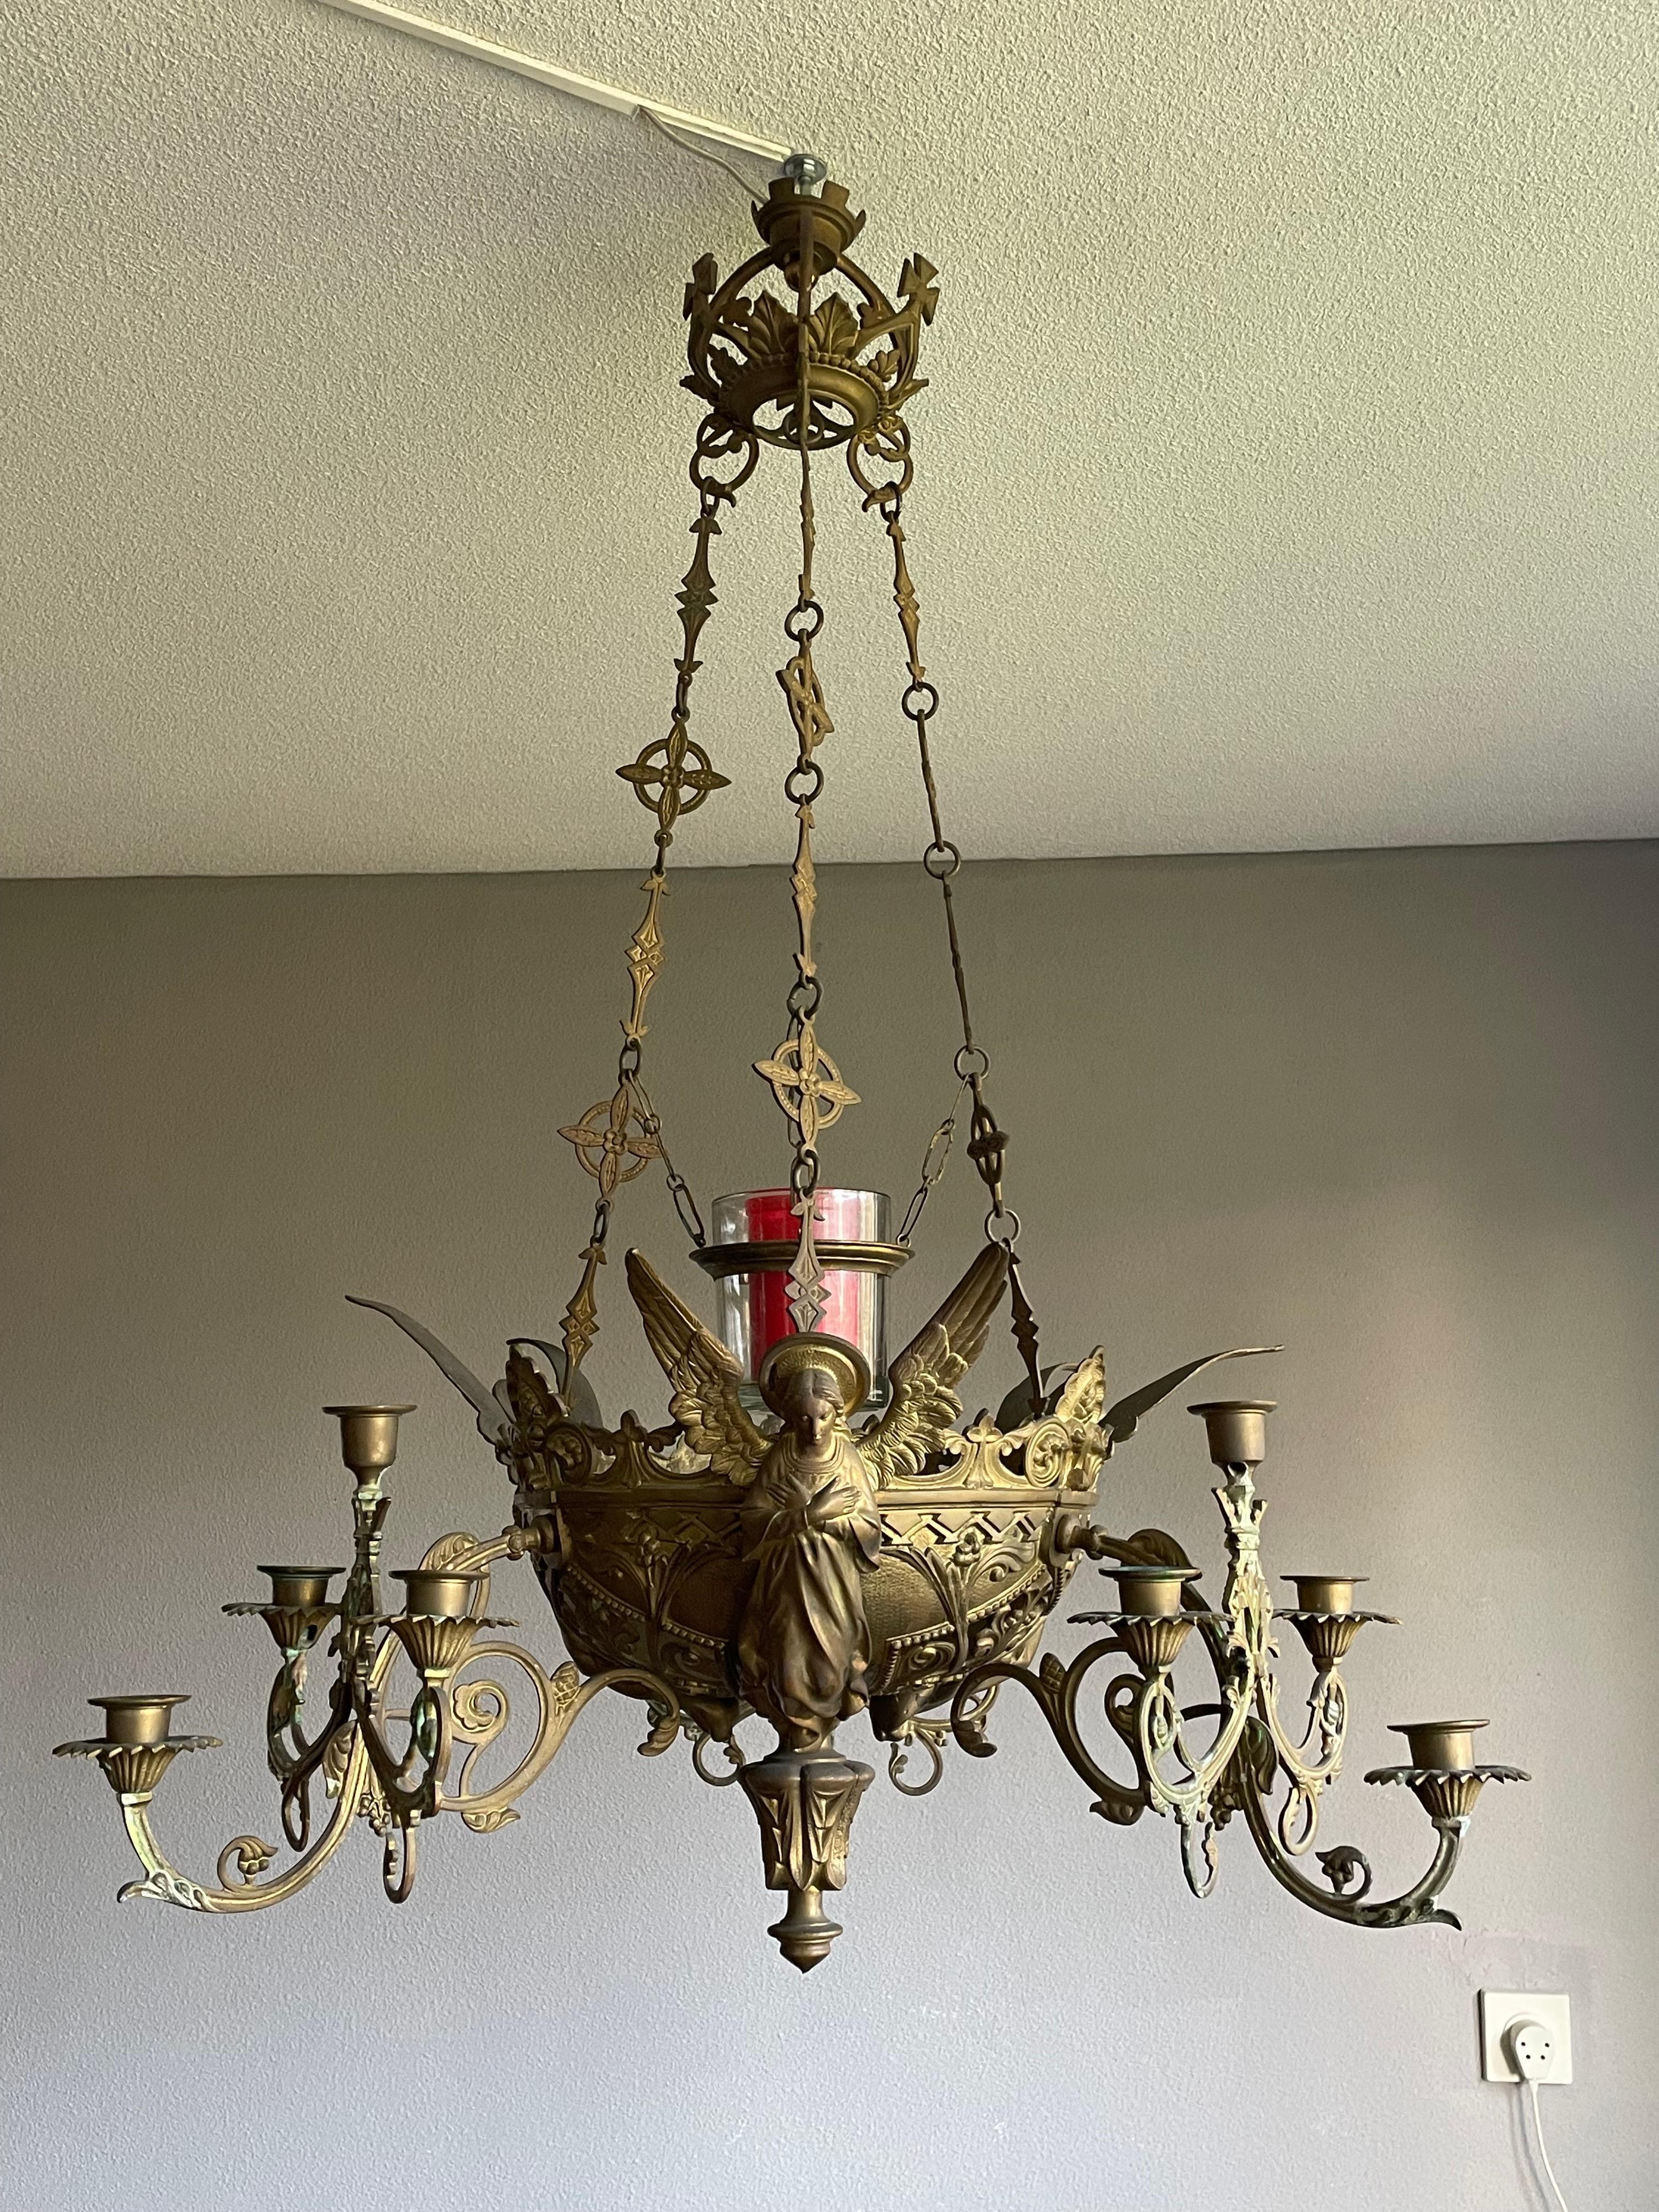 Bronze Gothic Revival Candle Chandelier w. Virgin Mary & Marian Cross Sculptures For Sale 13